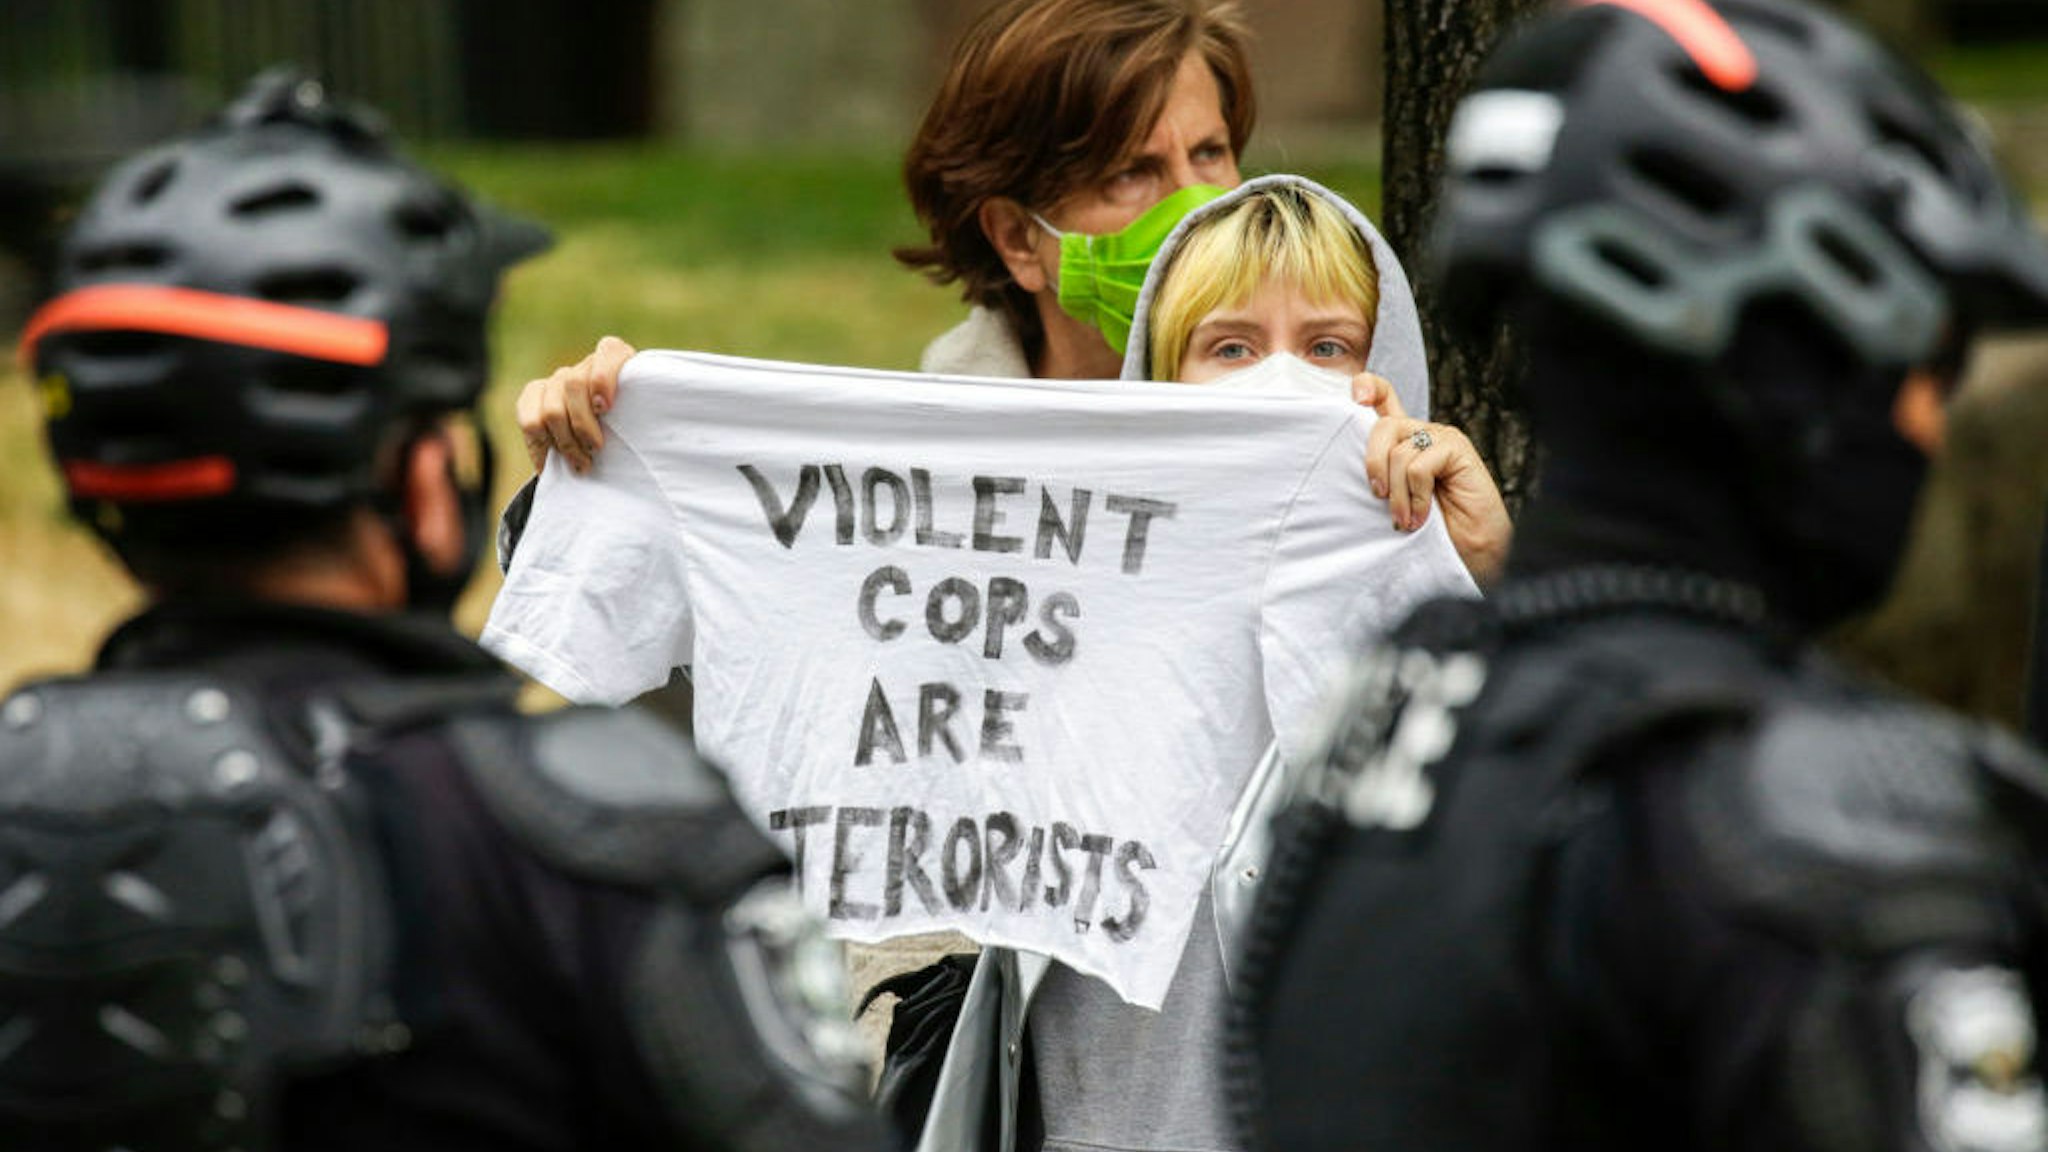 A woman holds a shirt that says "violent cops are terrorists" as Seattle Police arrested several people after demonstrators blocked an intersection outside the recently-cleared Capitol Hill Occupied Protest (CHOP) in Seattle, Washington on July 1, 2020. (Photo by Jason Redmond / AFP) (Photo by JASON REDMOND/AFP via Getty Images)